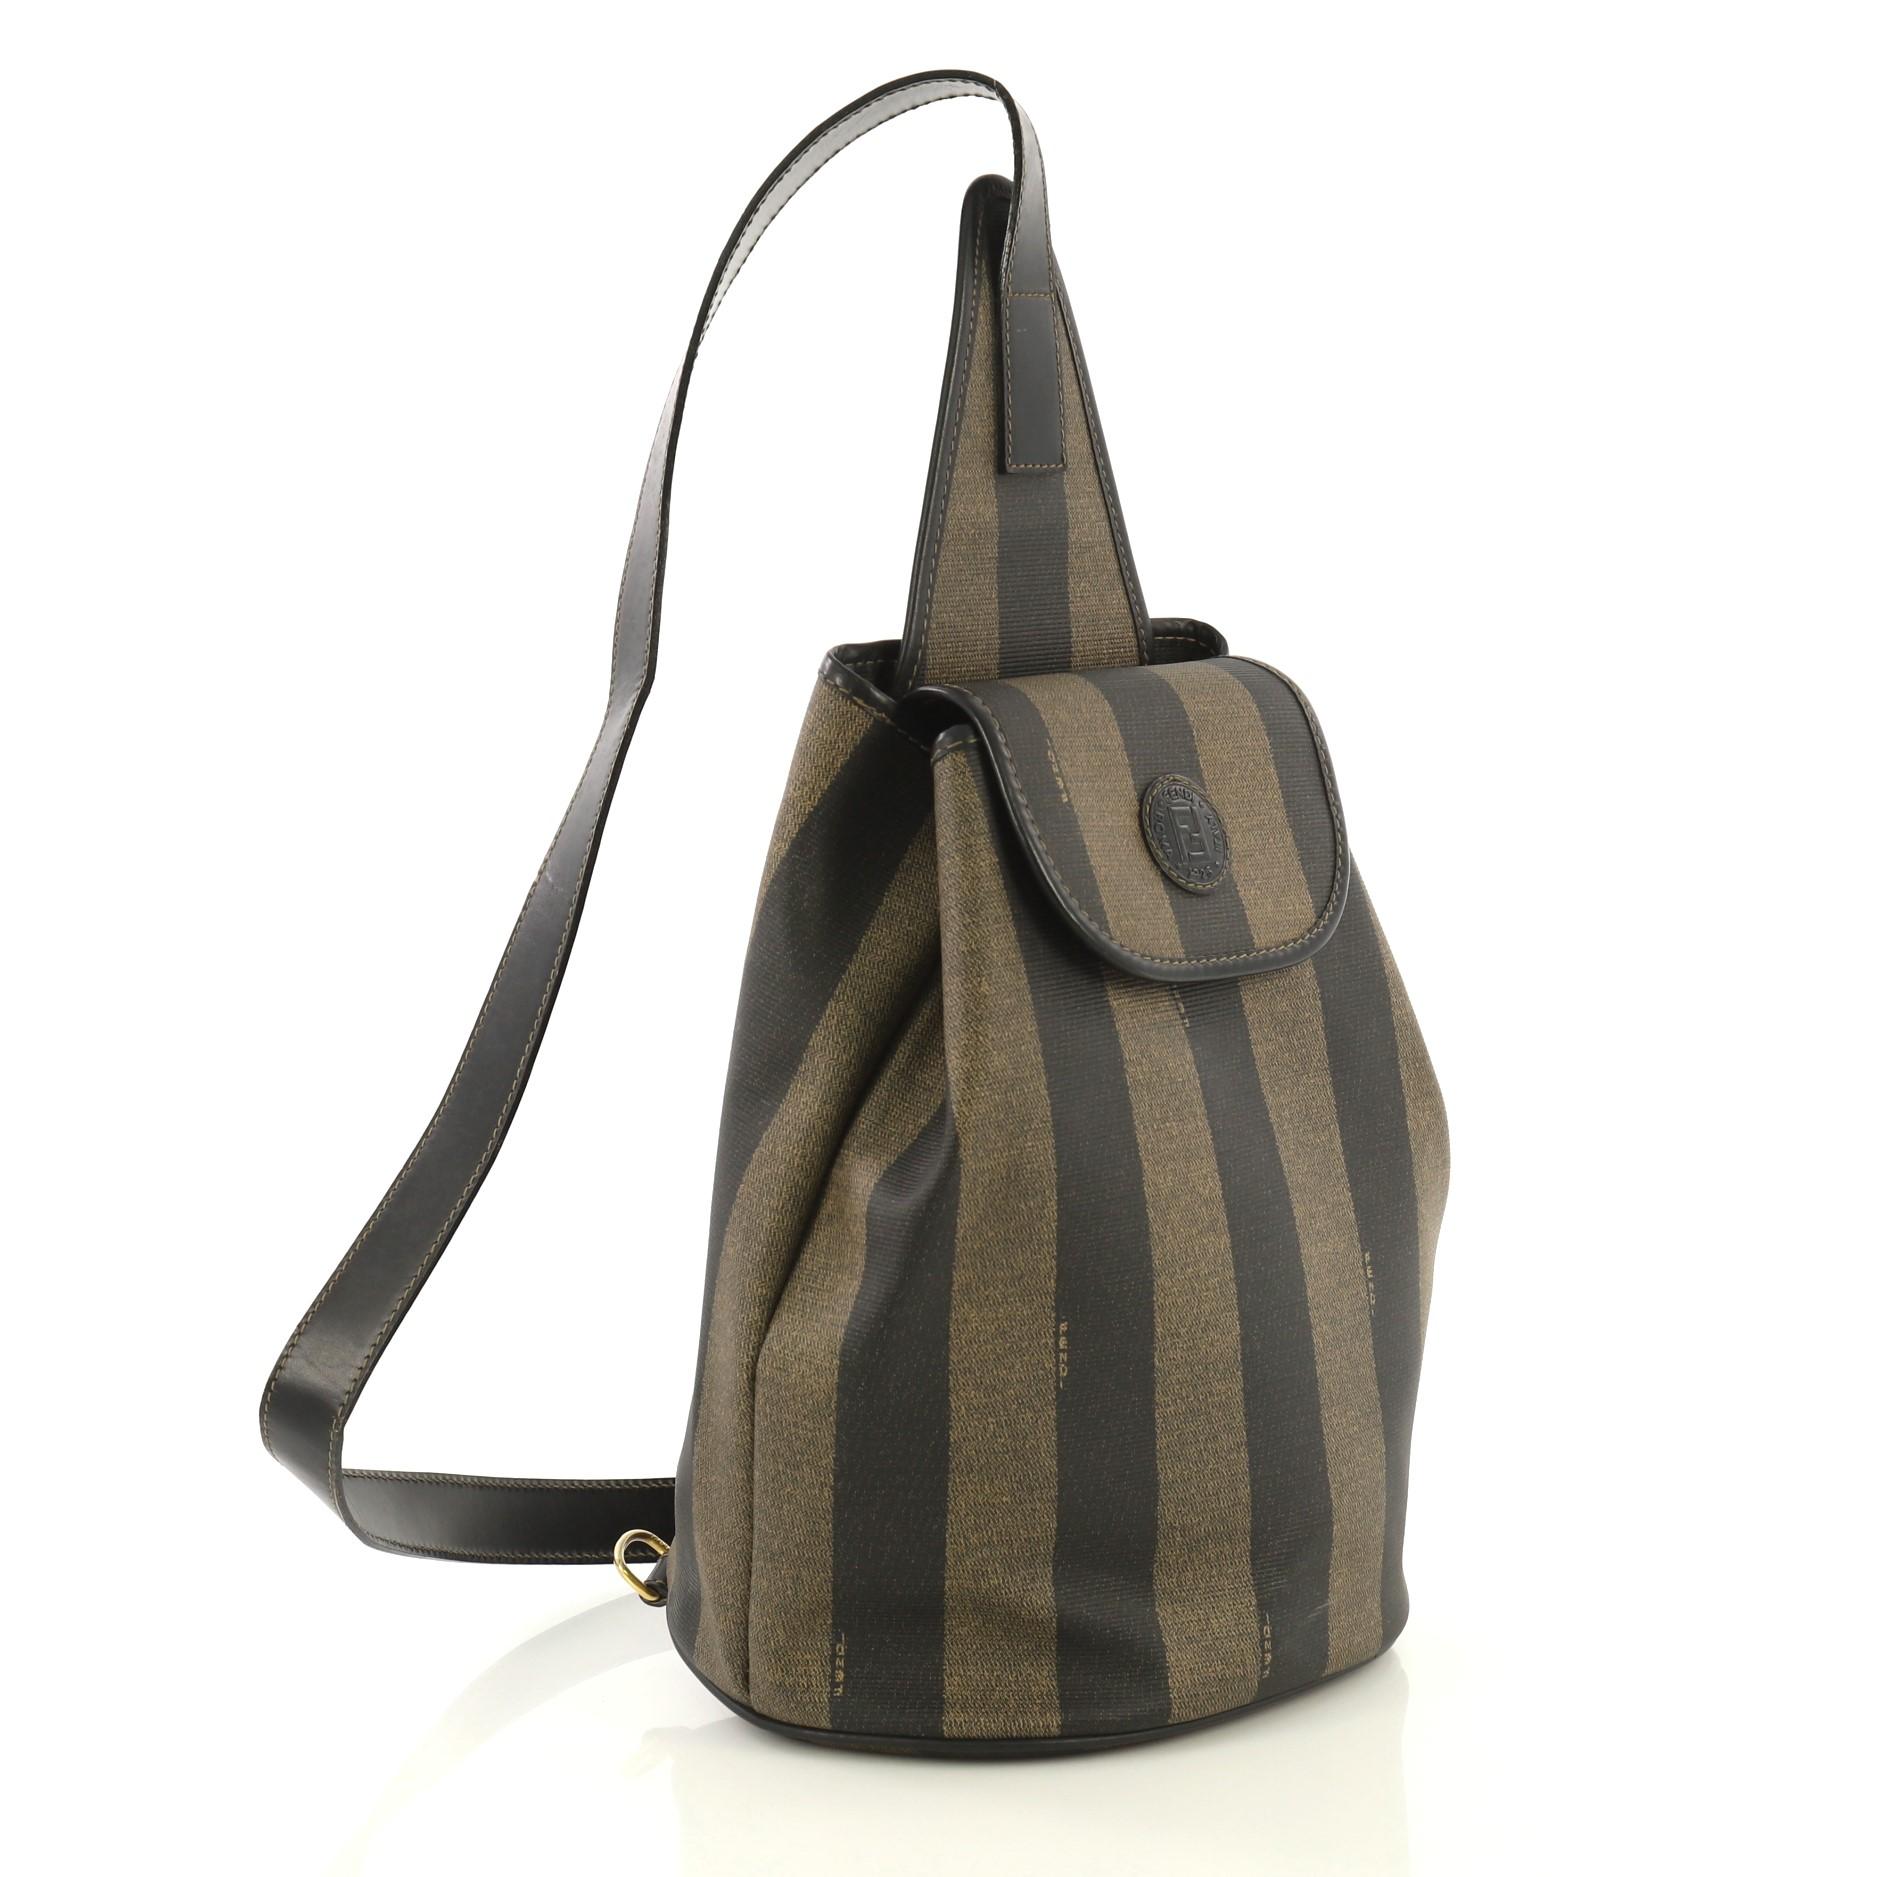 This Fendi Pequin Sling Backpack Coated Canvas Medium, crafted in black and brown coated canvas, features a leather shoulder strap and gold-tone hardware. Its flap opens to a black fabric interior with zip pocket. 

Estimated Retail Price: